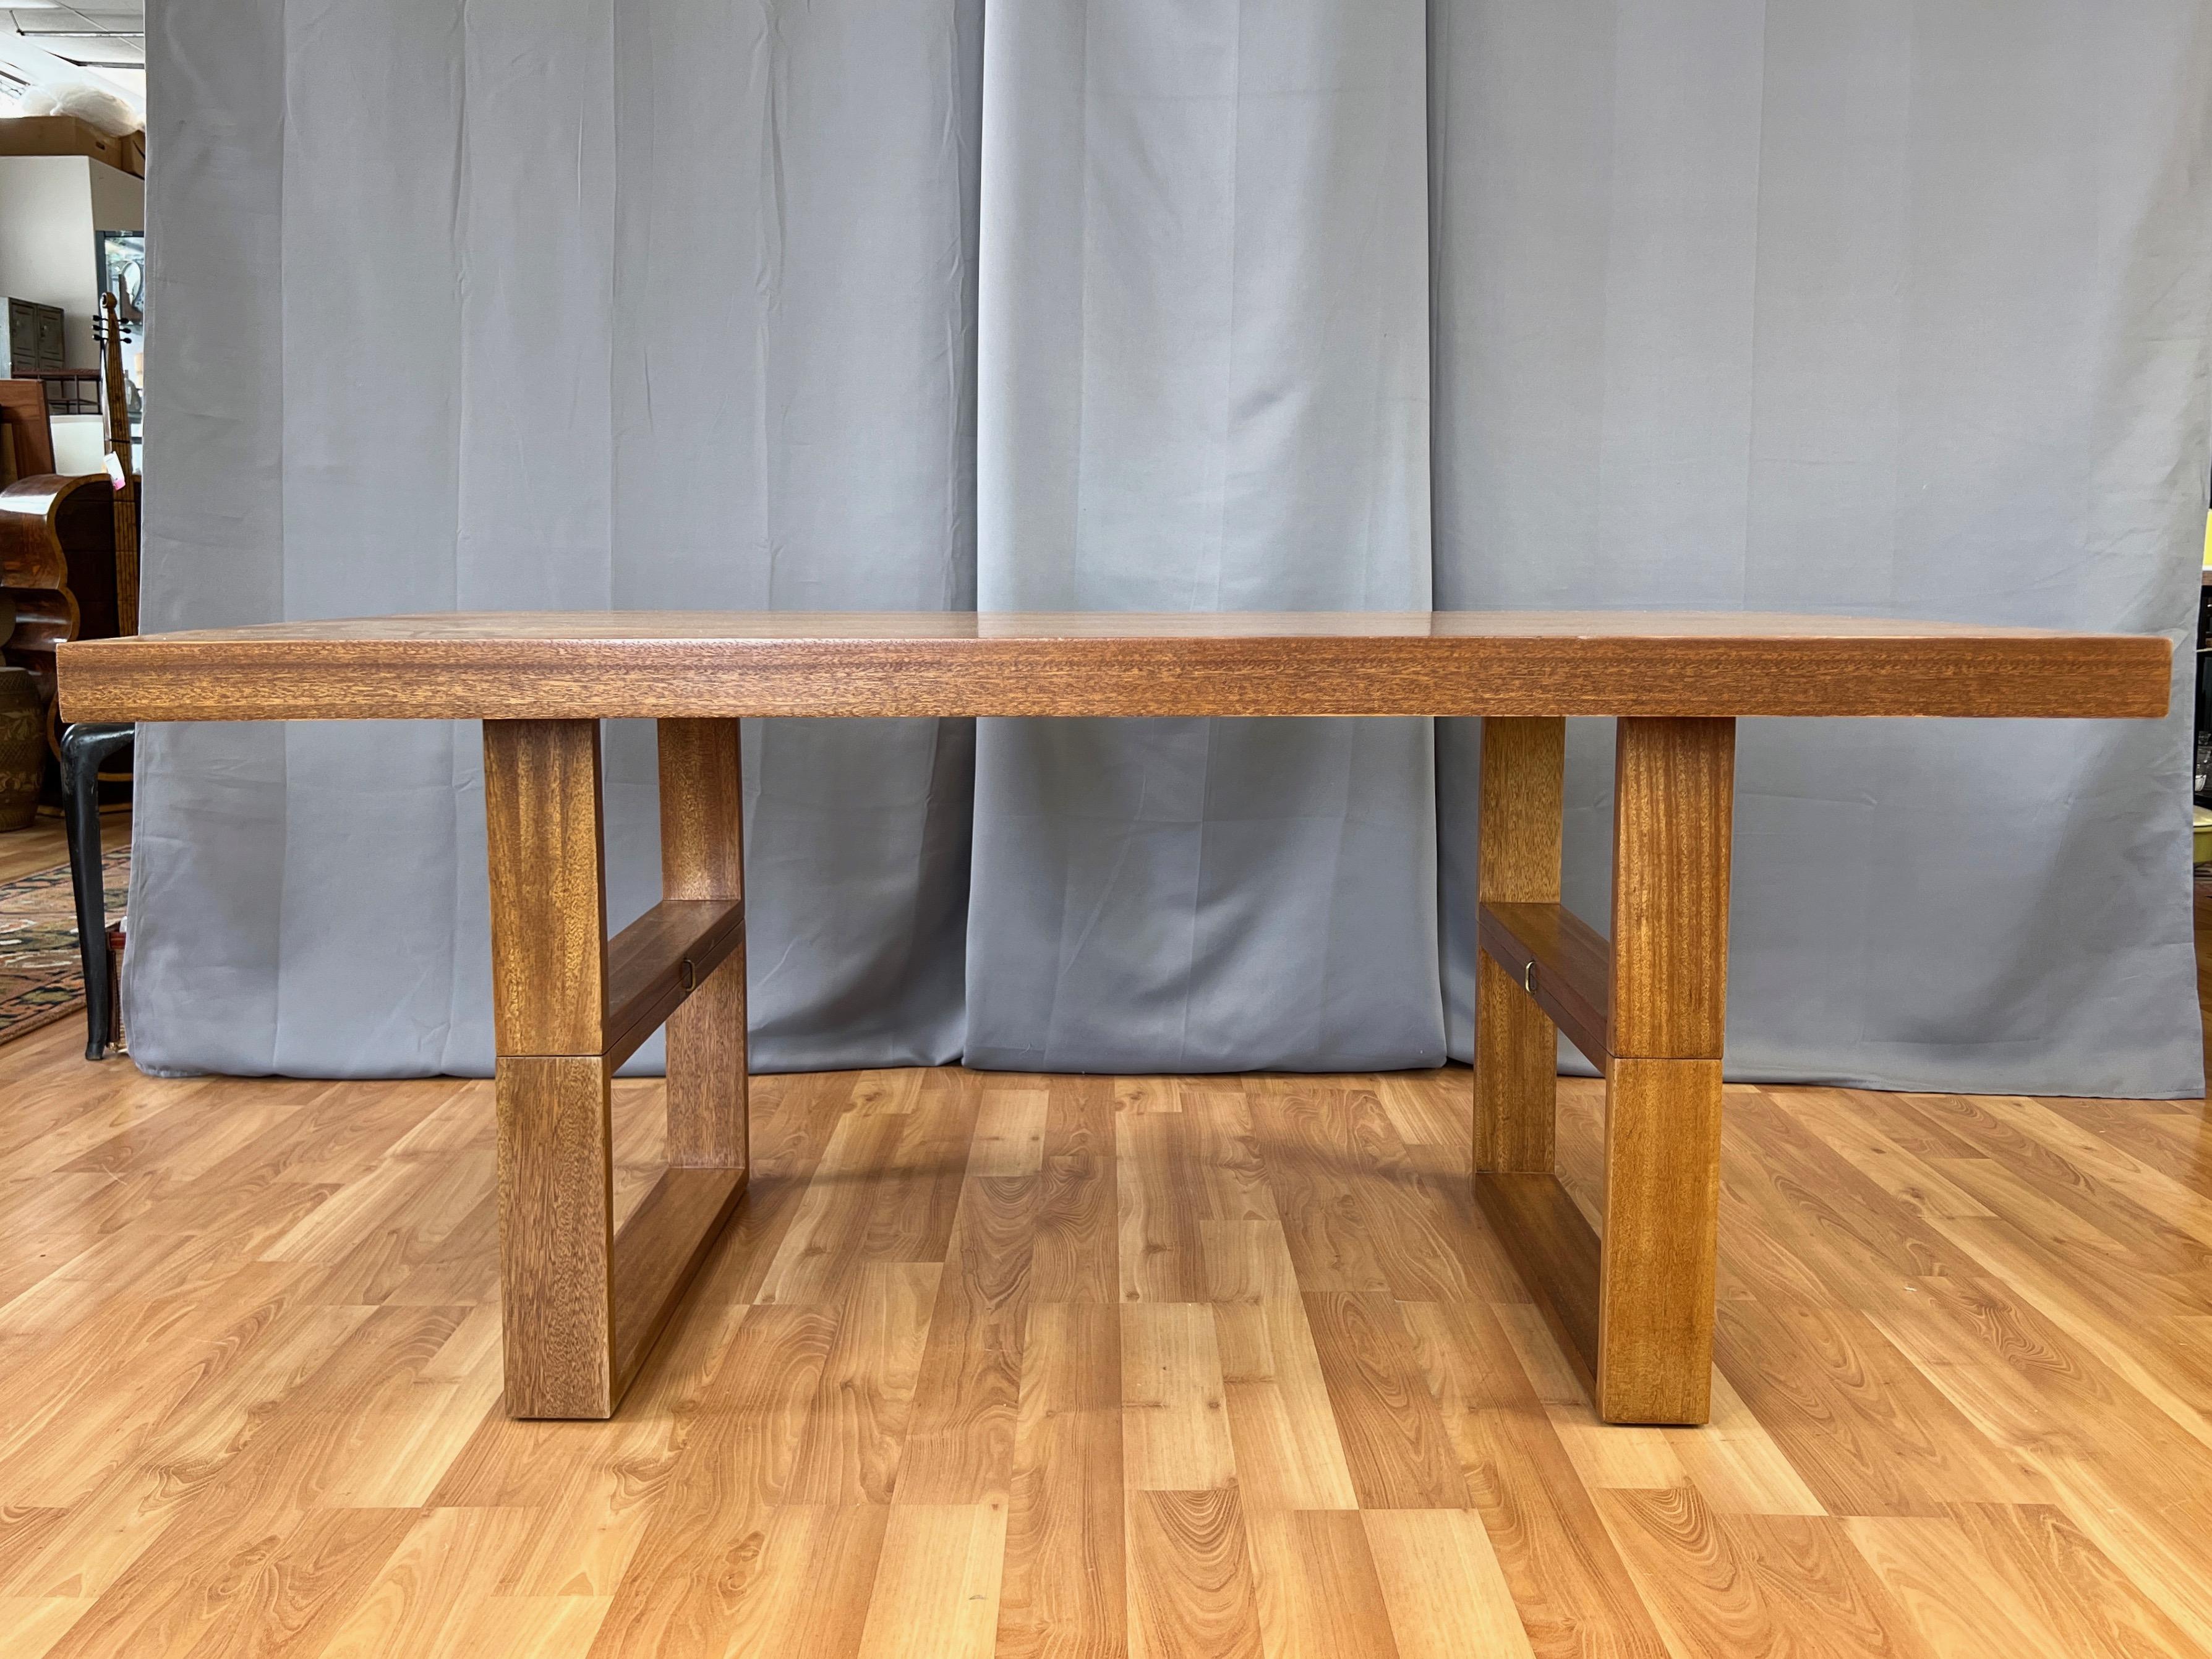 A 1953 mid-century modern mahogany dual-purpose “Camel” dining table and coffee table designed by Hendrik Van Keppel and Taylor Green for Brown-Saltman, with materials crafted by Jasper Wood Products Co.

Notable for its clean, timeless lines and